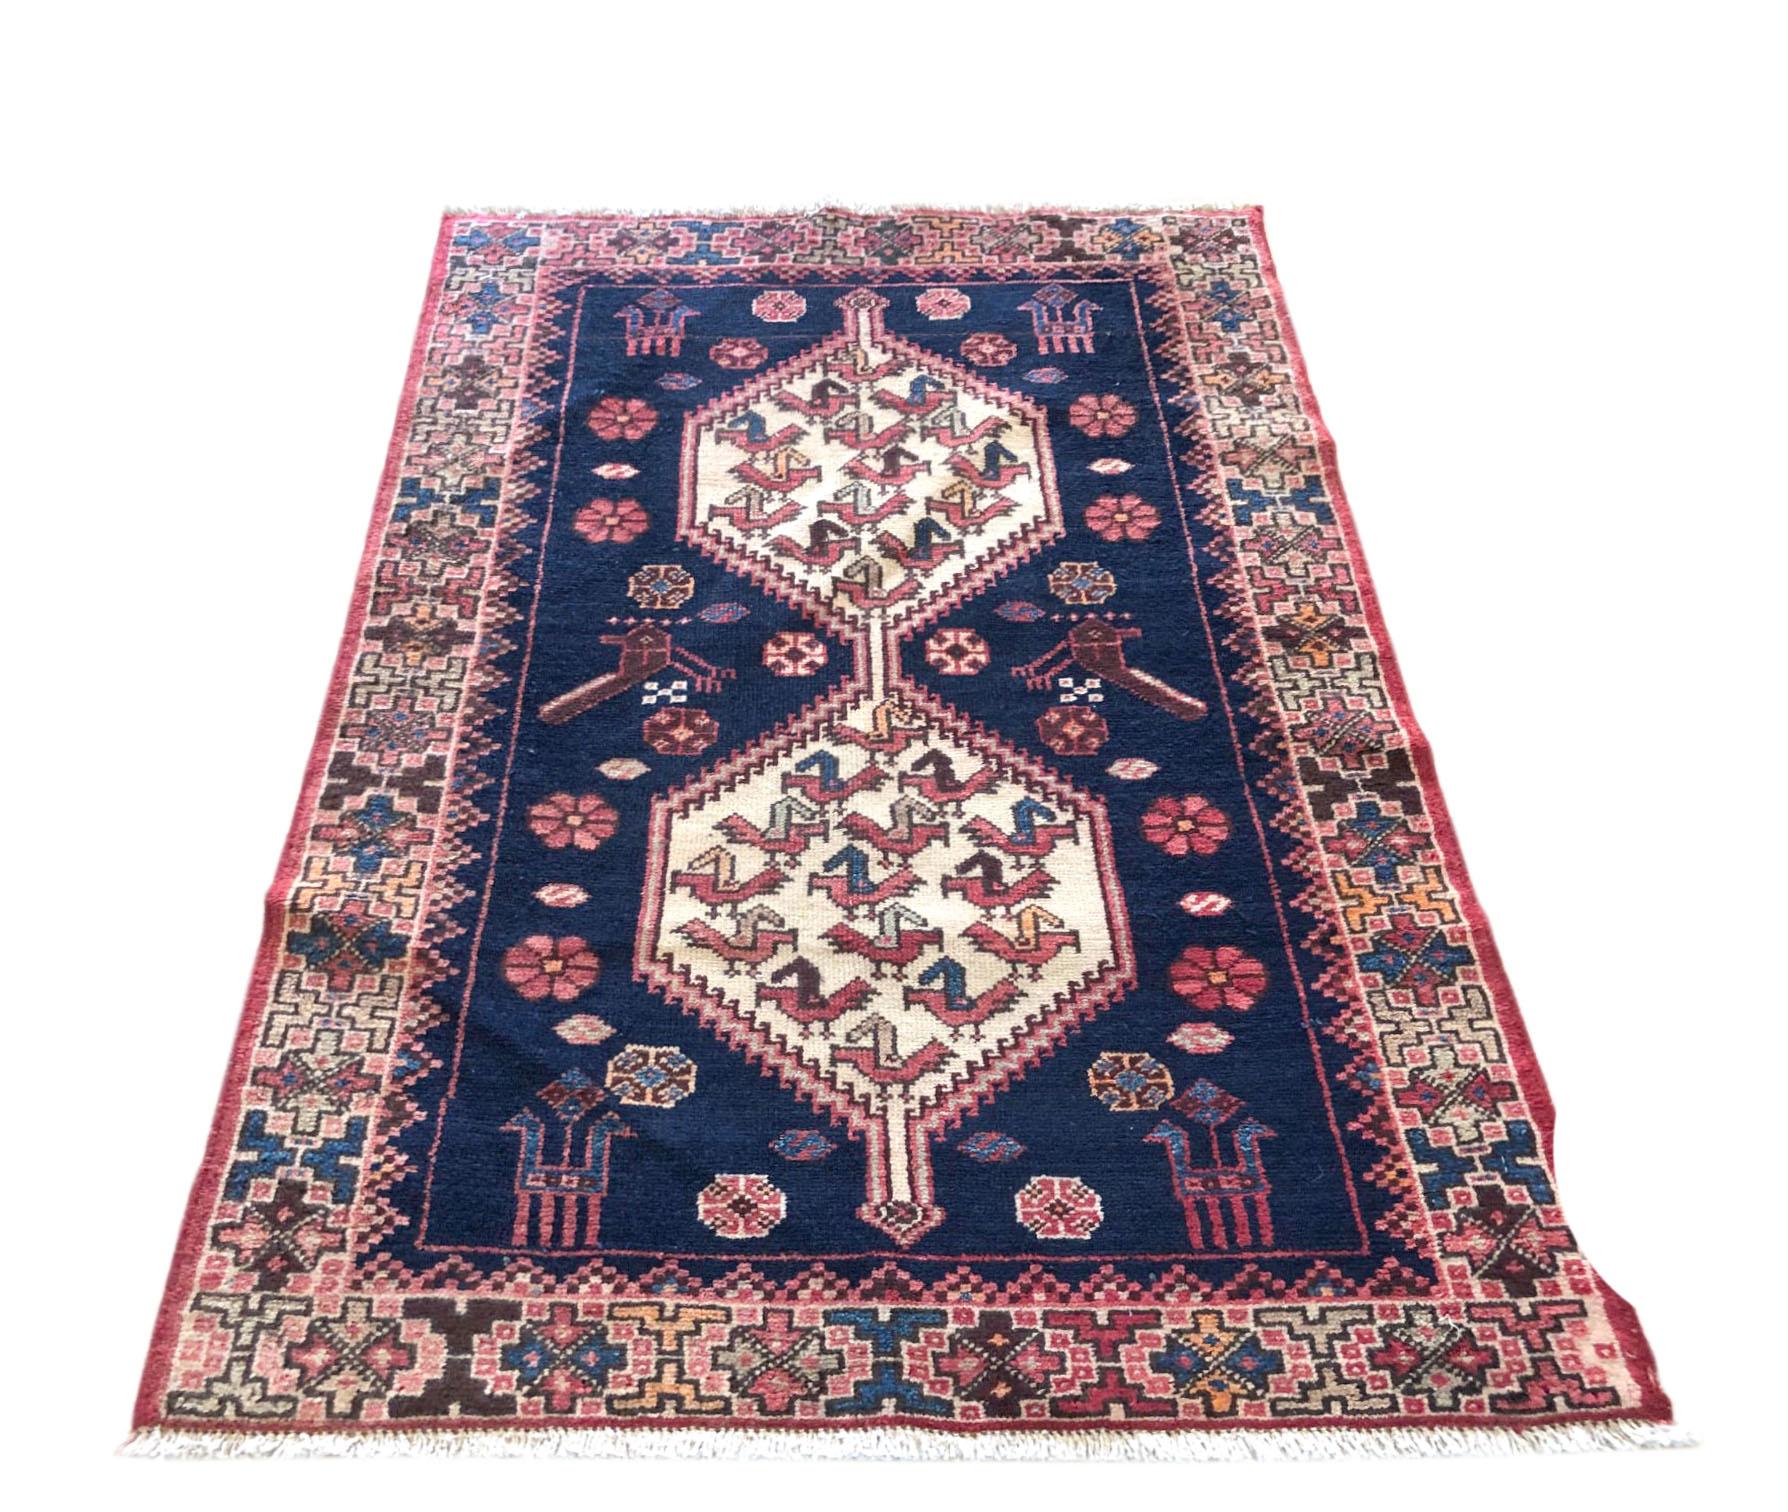 This rug is knotted in the province of Azarbayjan in North West of Iran. The design is geometric with repeated medallion. The pile is wool with cotton foundation. The base color is blue and with multi-color border. The design and color combination